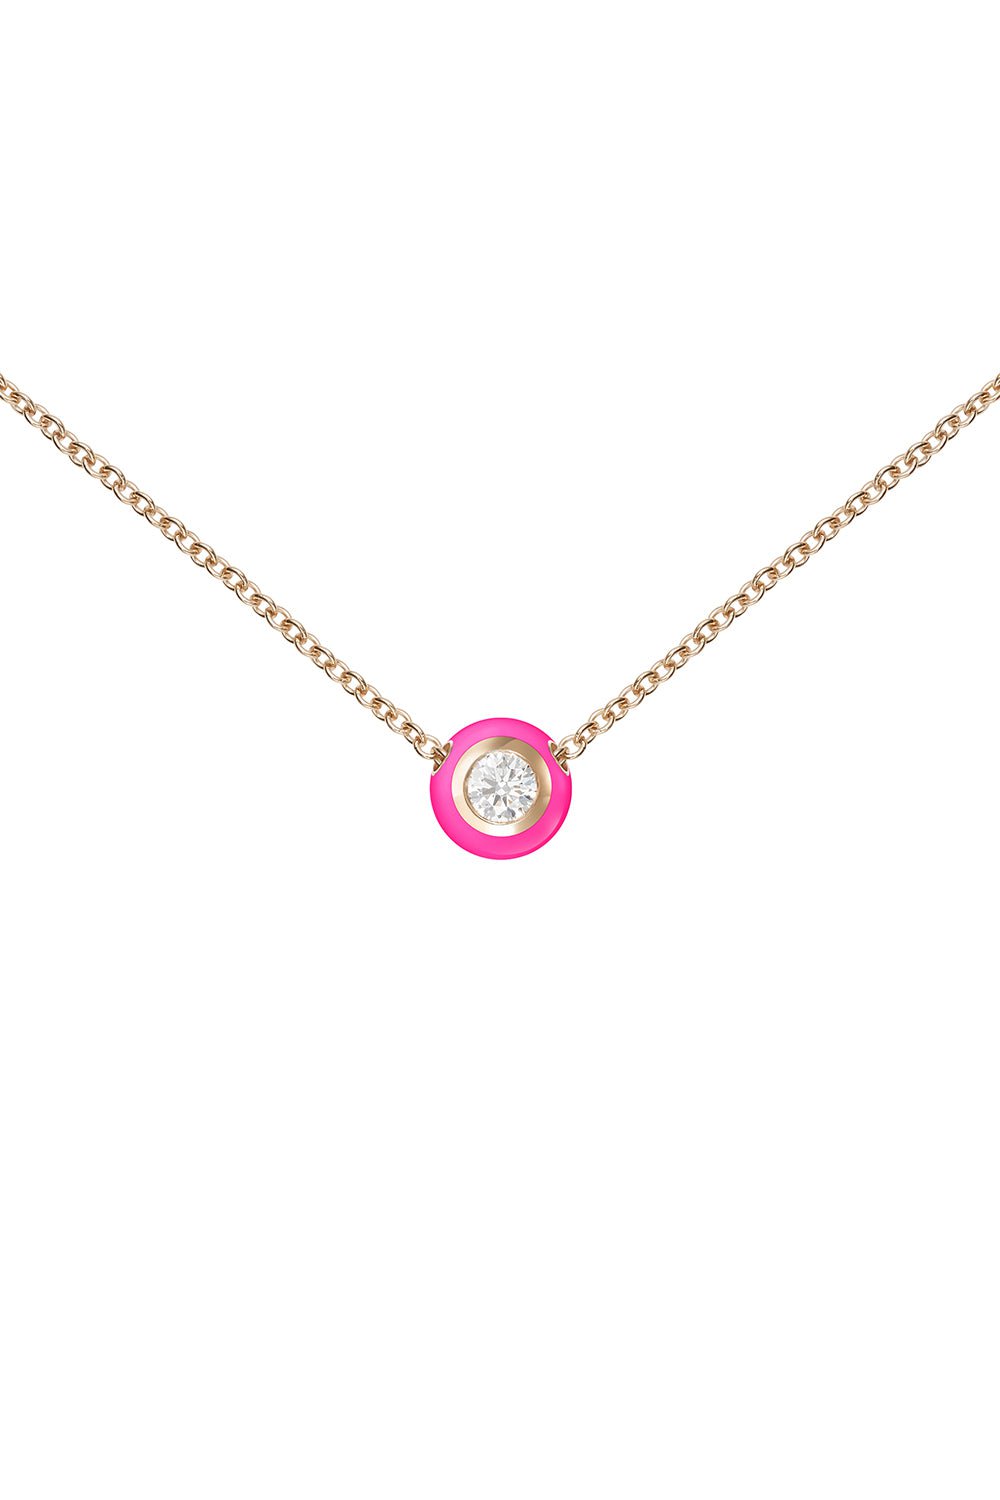 MELISSA KAYE-Small Neon Pink Audrey Pendant Necklace-ROSE GOLD